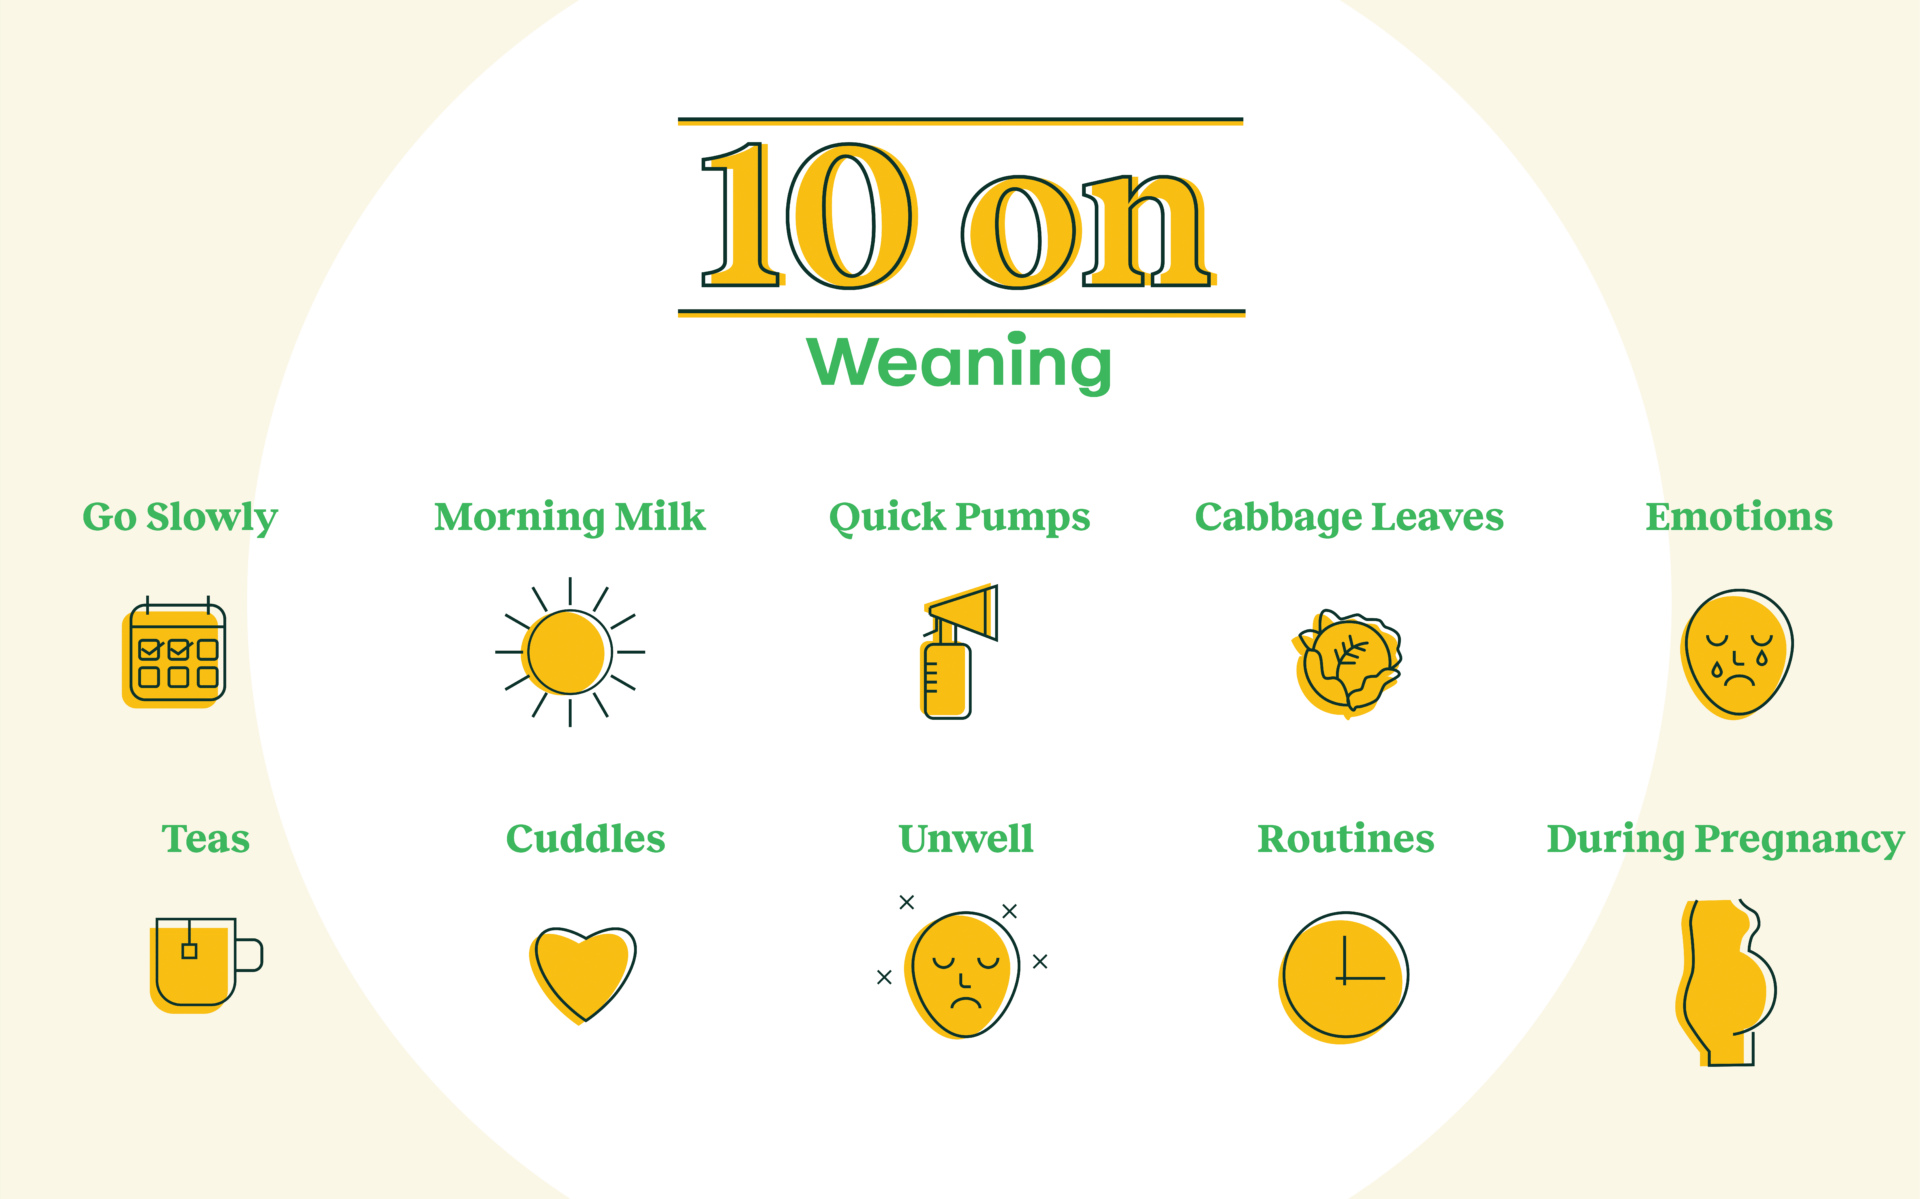 Pictograph representing weaning